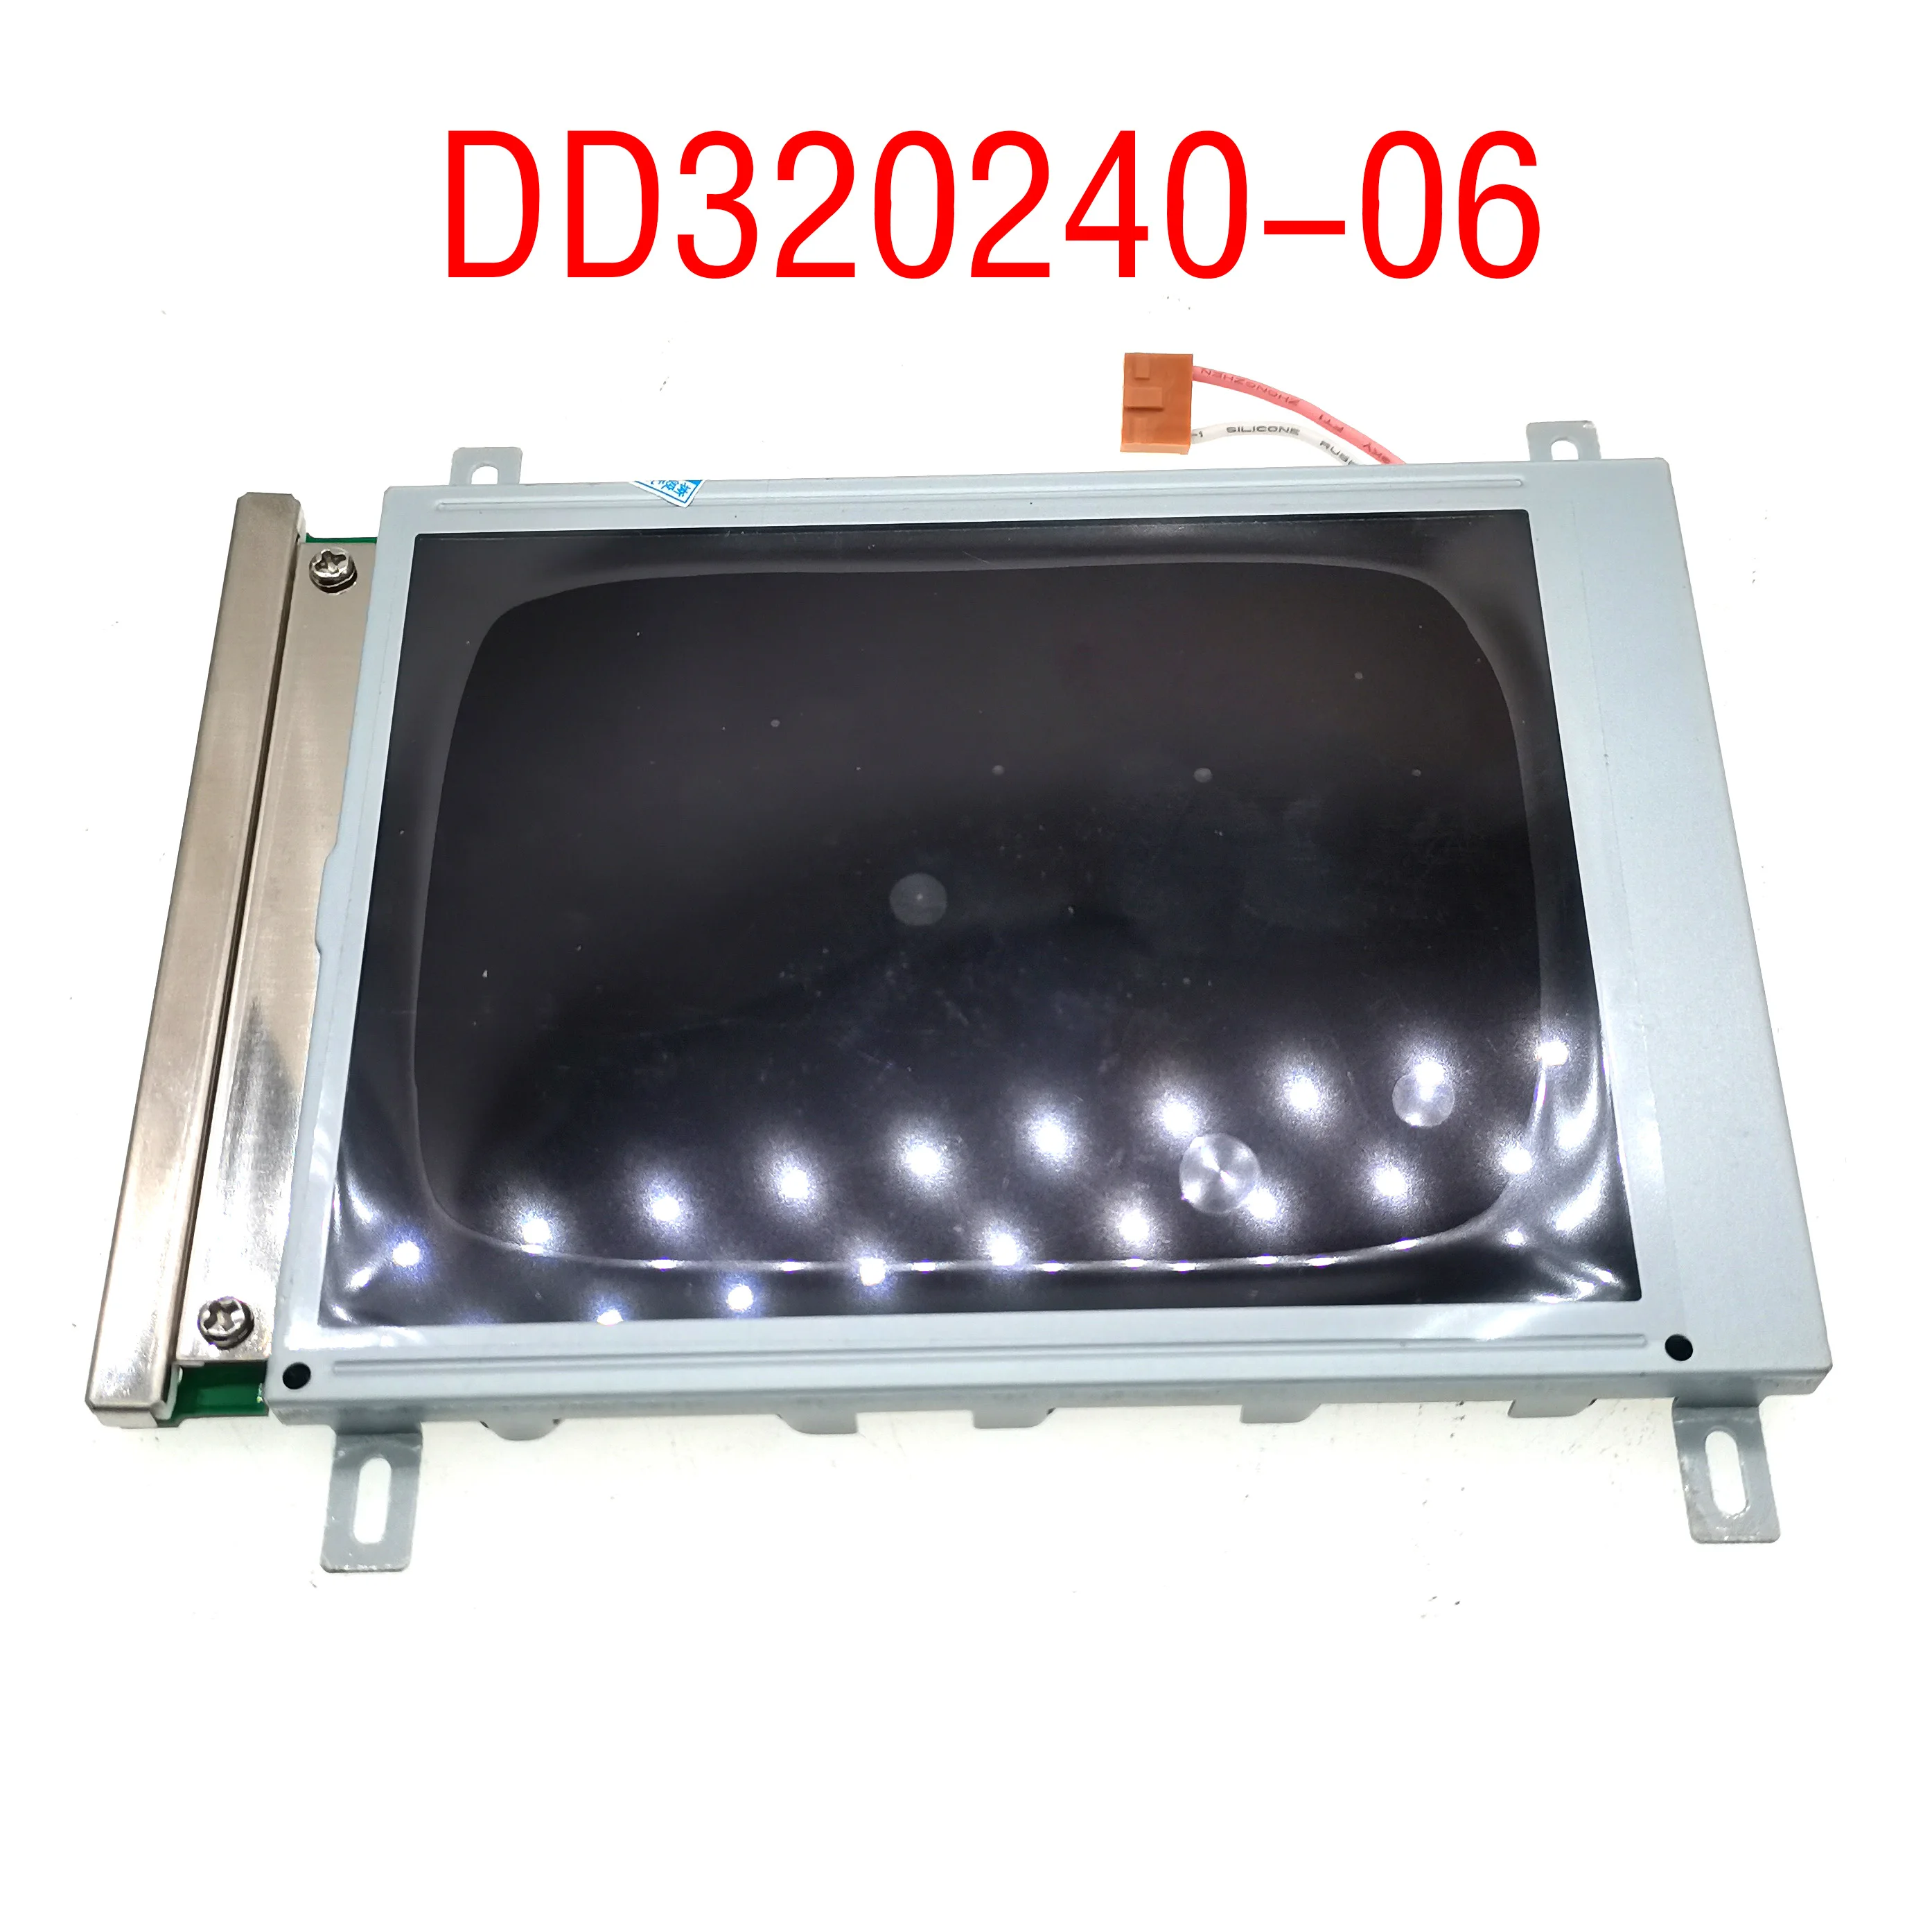 

Can replace DD320240-06 / MGLS-320240-HV-F / STN-CCFL-N compatible LCD screen